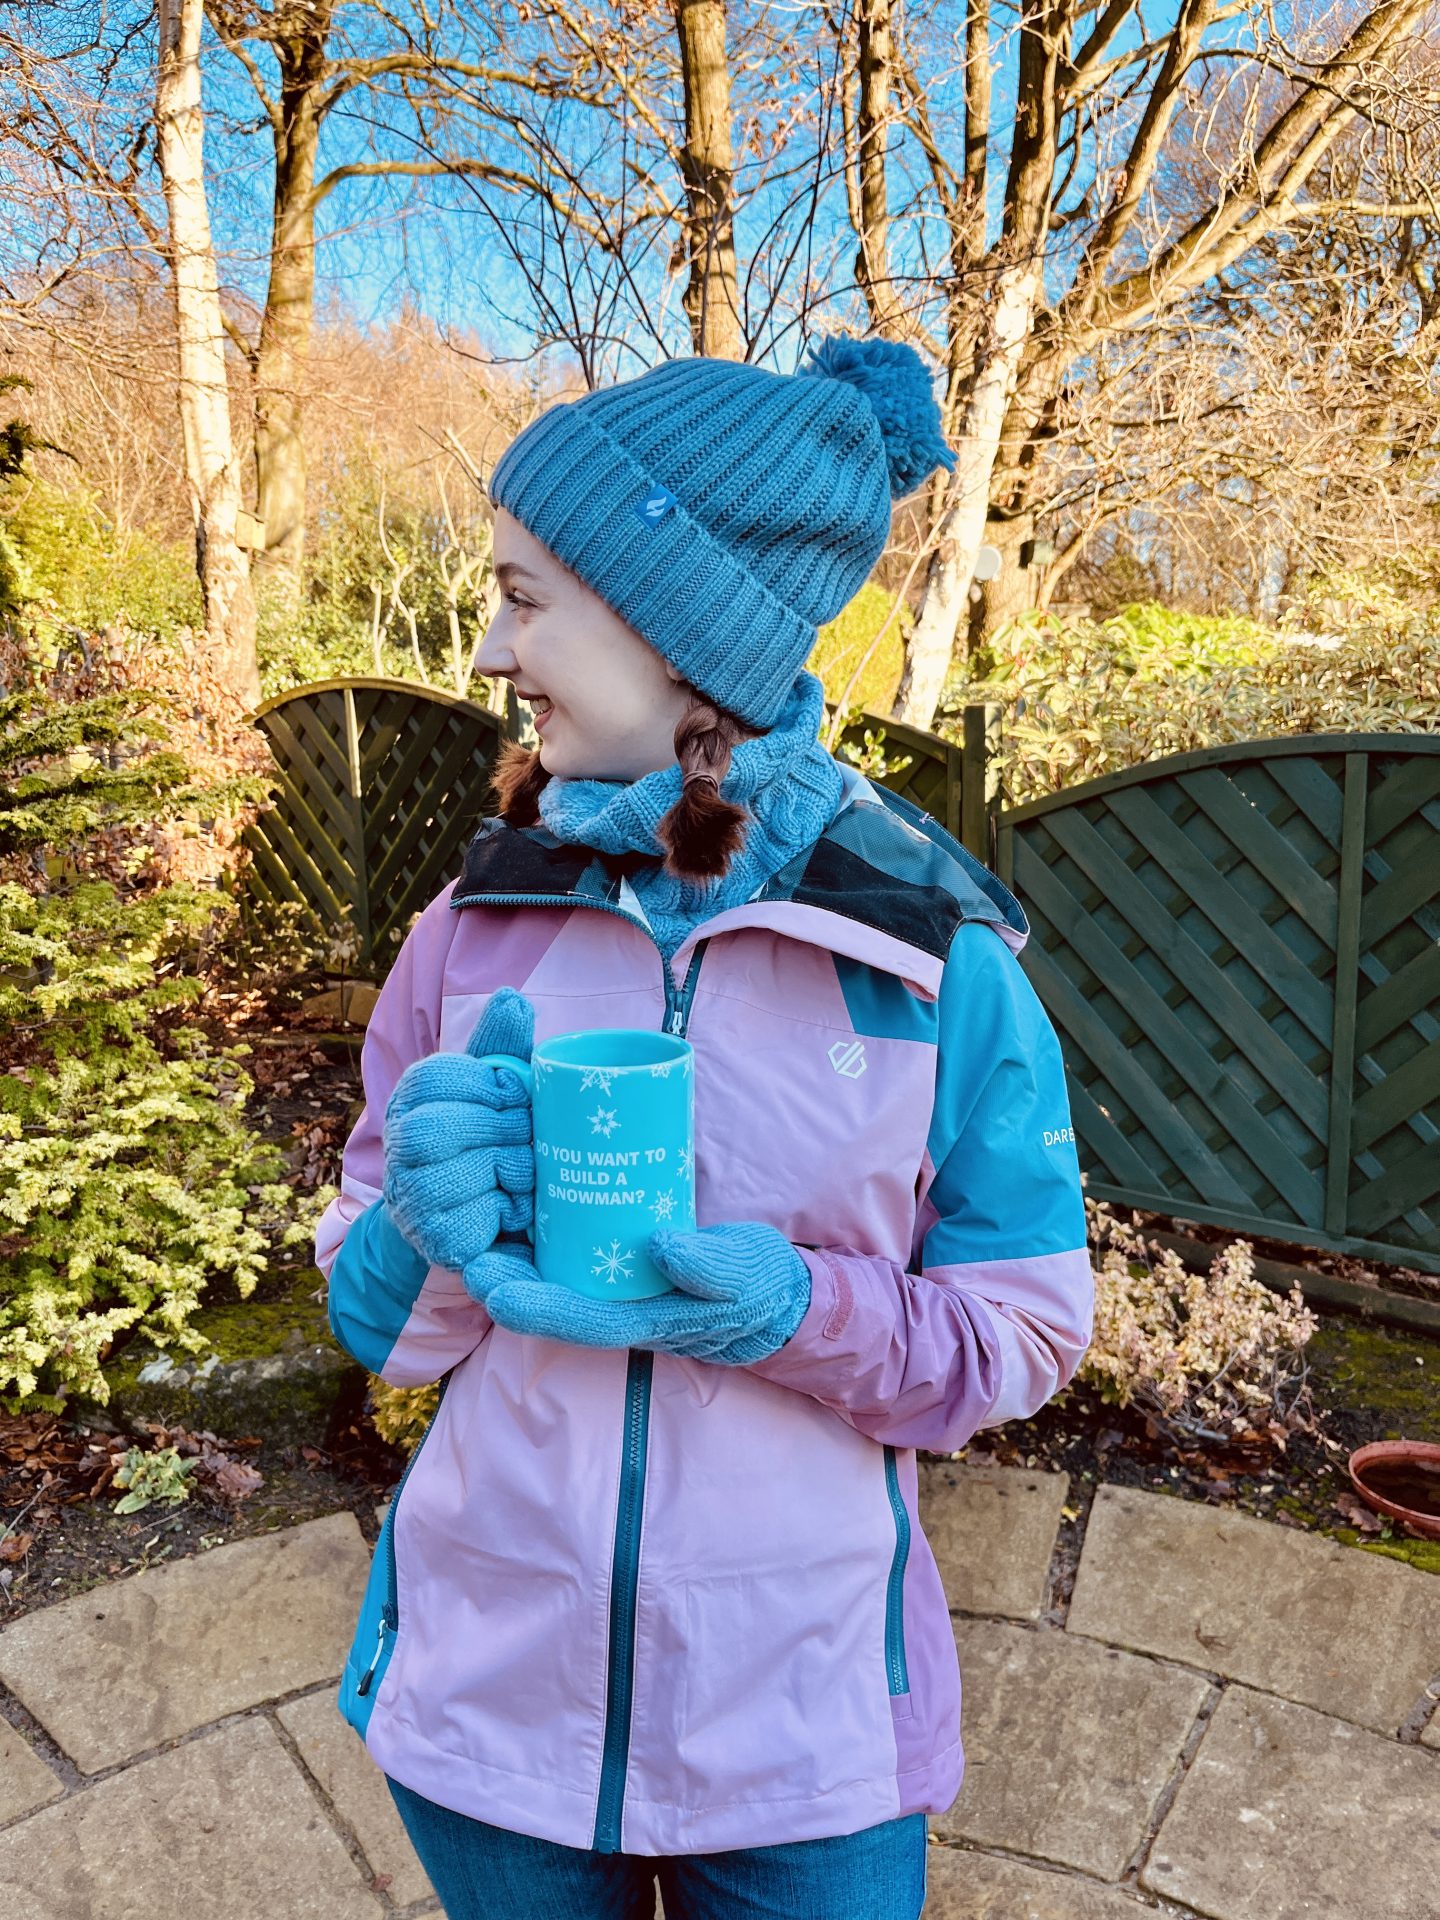 Pippa stood up outdoors, wearing her cosy new HeatHolders hat, neckwarmer and gloves in the colour dusty blue. She's also wearing a pink and blue raincoat and has her hair in plaits, looking off to the side and smiling.